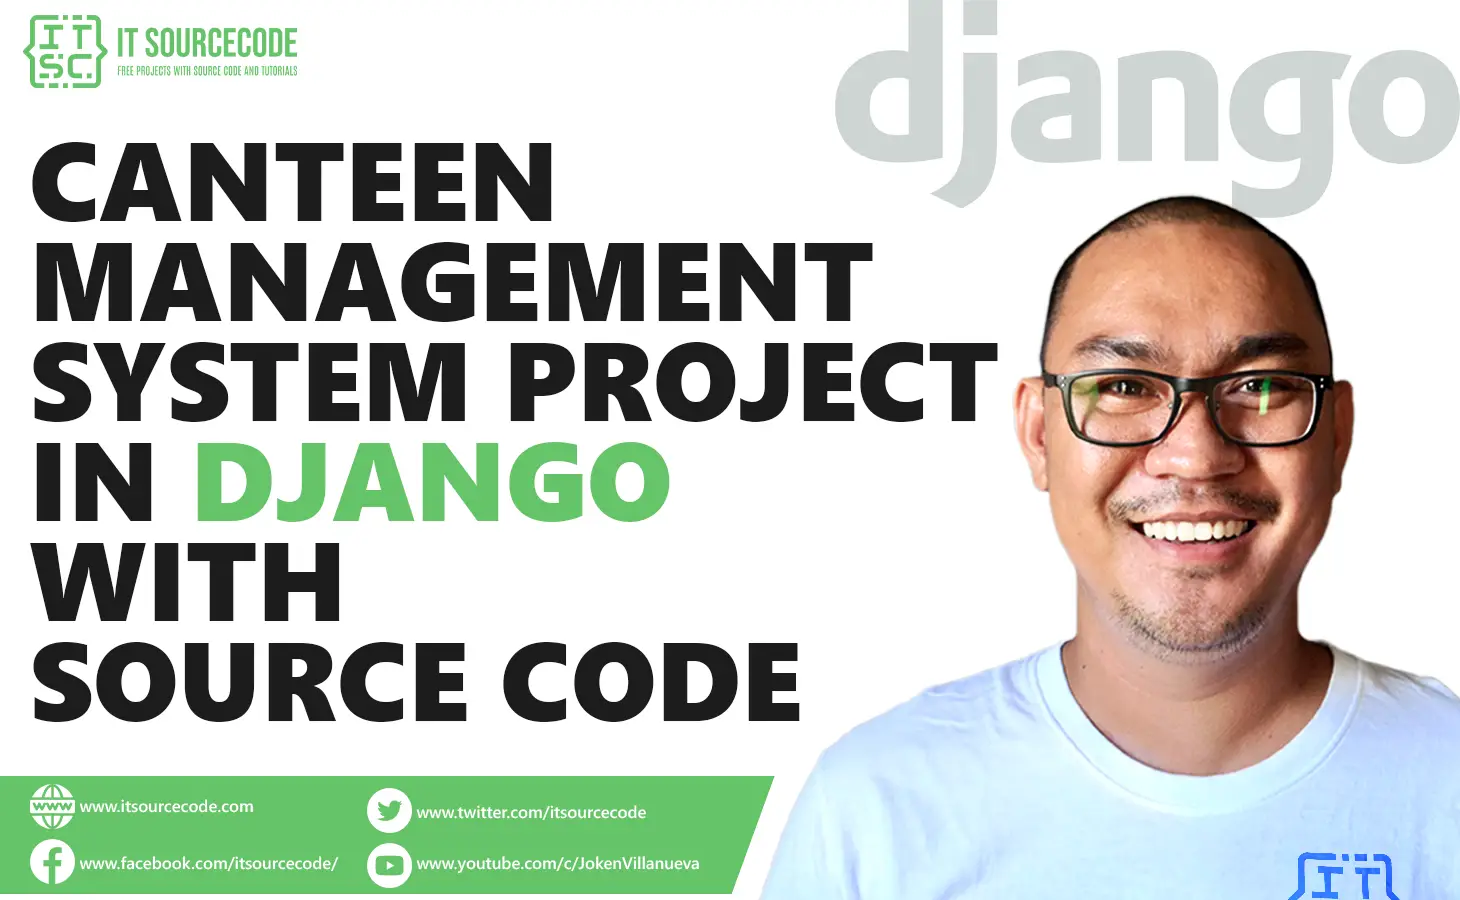 Canteen Management System Project in Django with Source